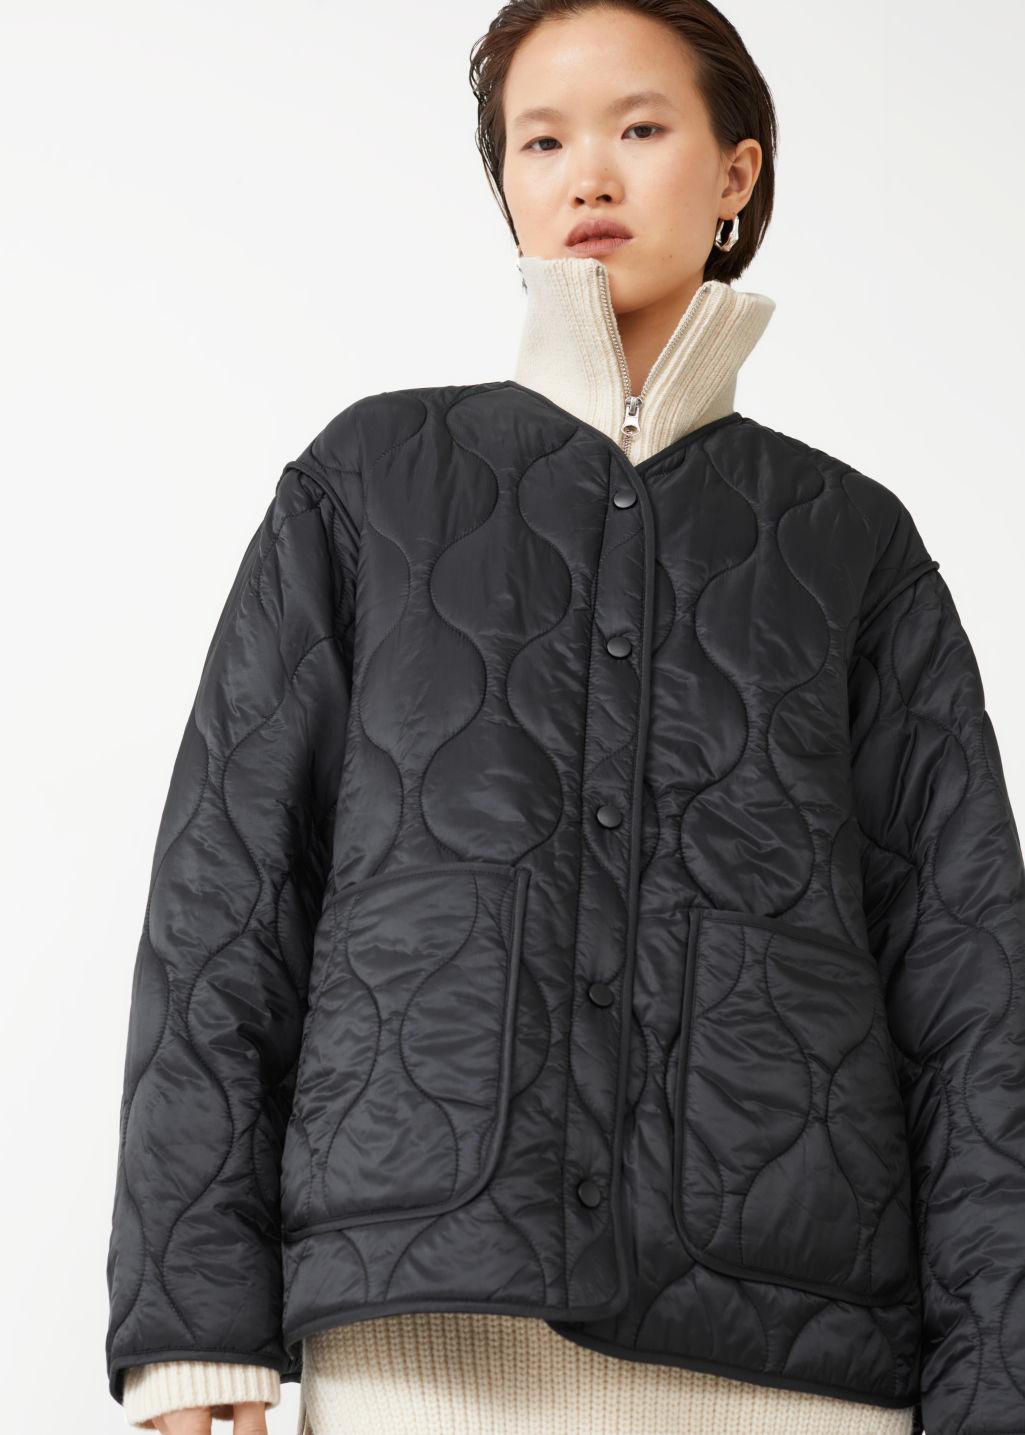 & Other Stories Oversized Wave Quilted Jacket in Black | Lyst